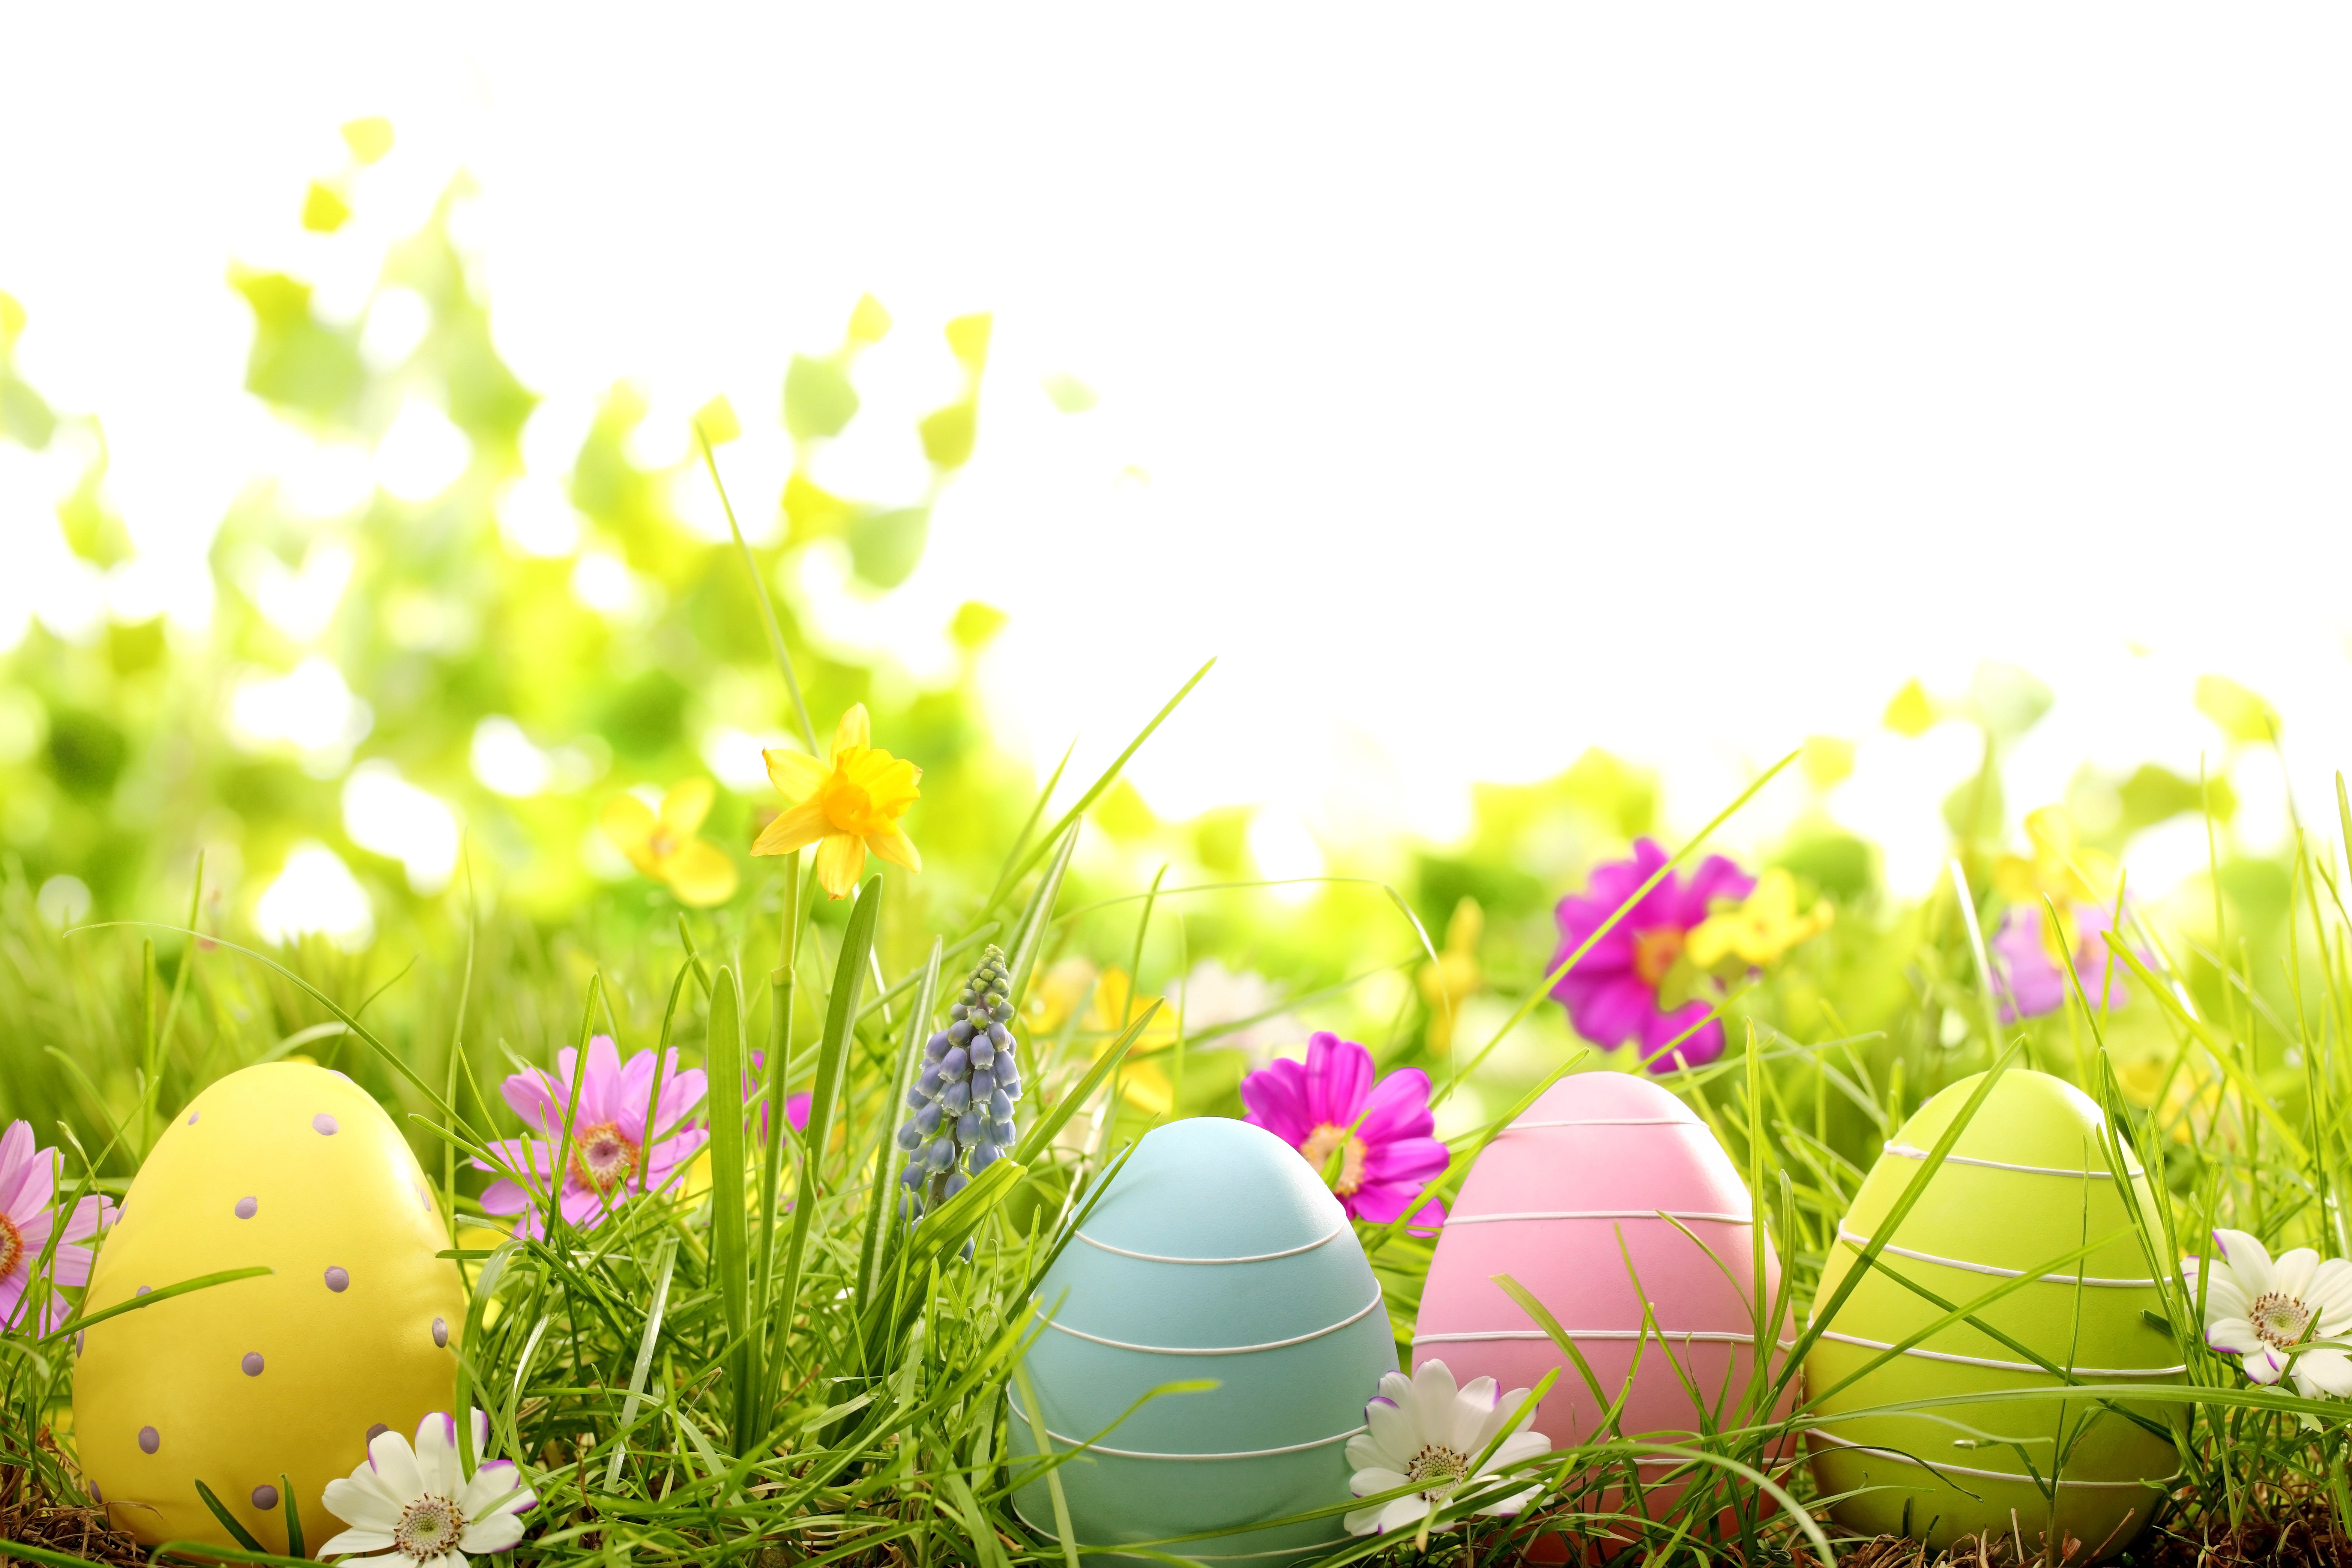 Easter Background Wallpaper HD Image